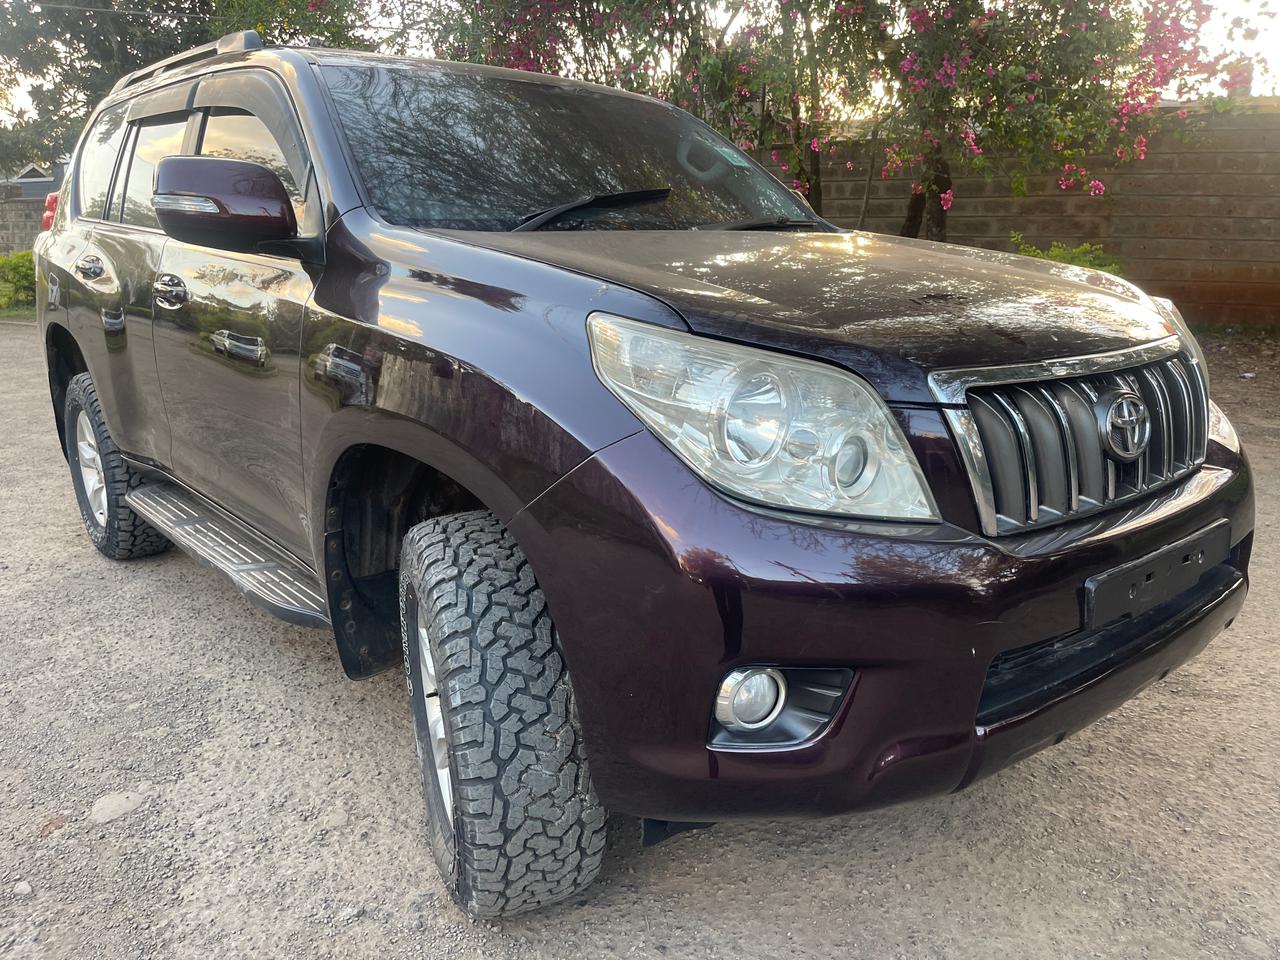 Toyota Prado j150 DIESEL KDK 3.7M ONLY You Pay 30% Deposit Trade in OK with SUNROOF